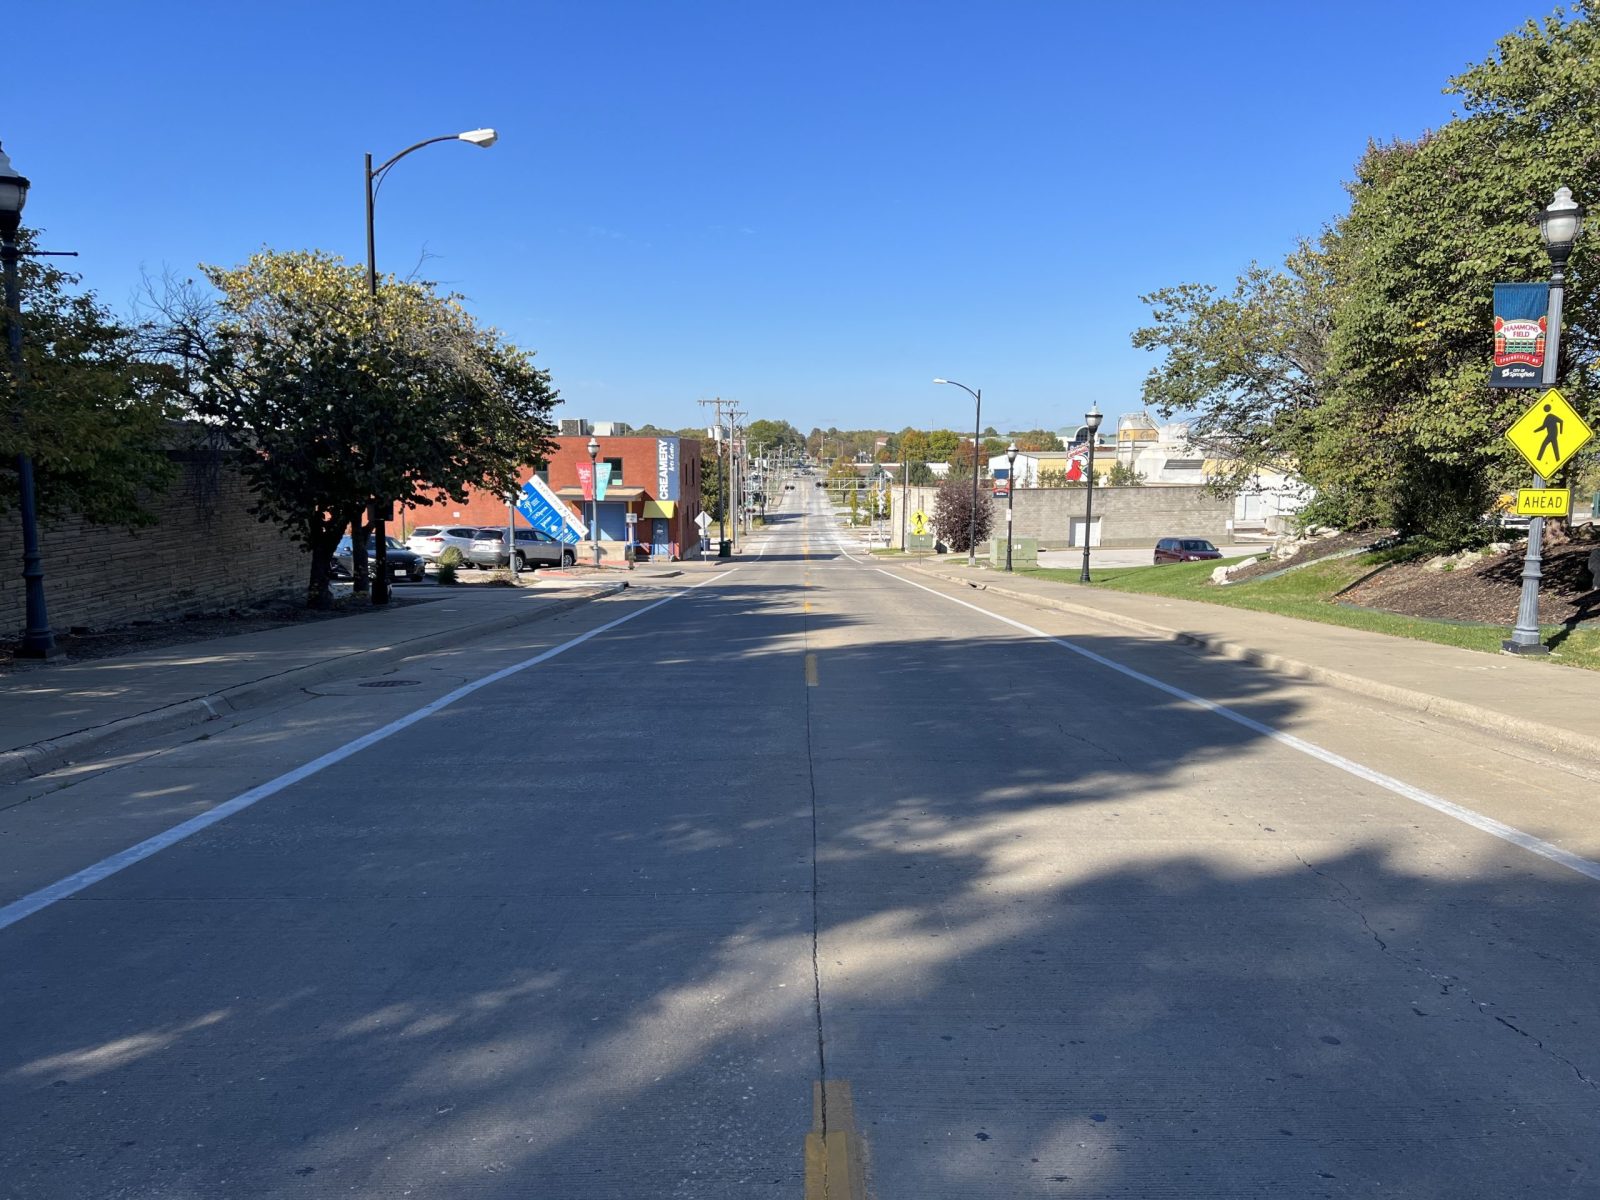 Sherman Avenue connects Chestnut Expressway to Jordan Valley Park